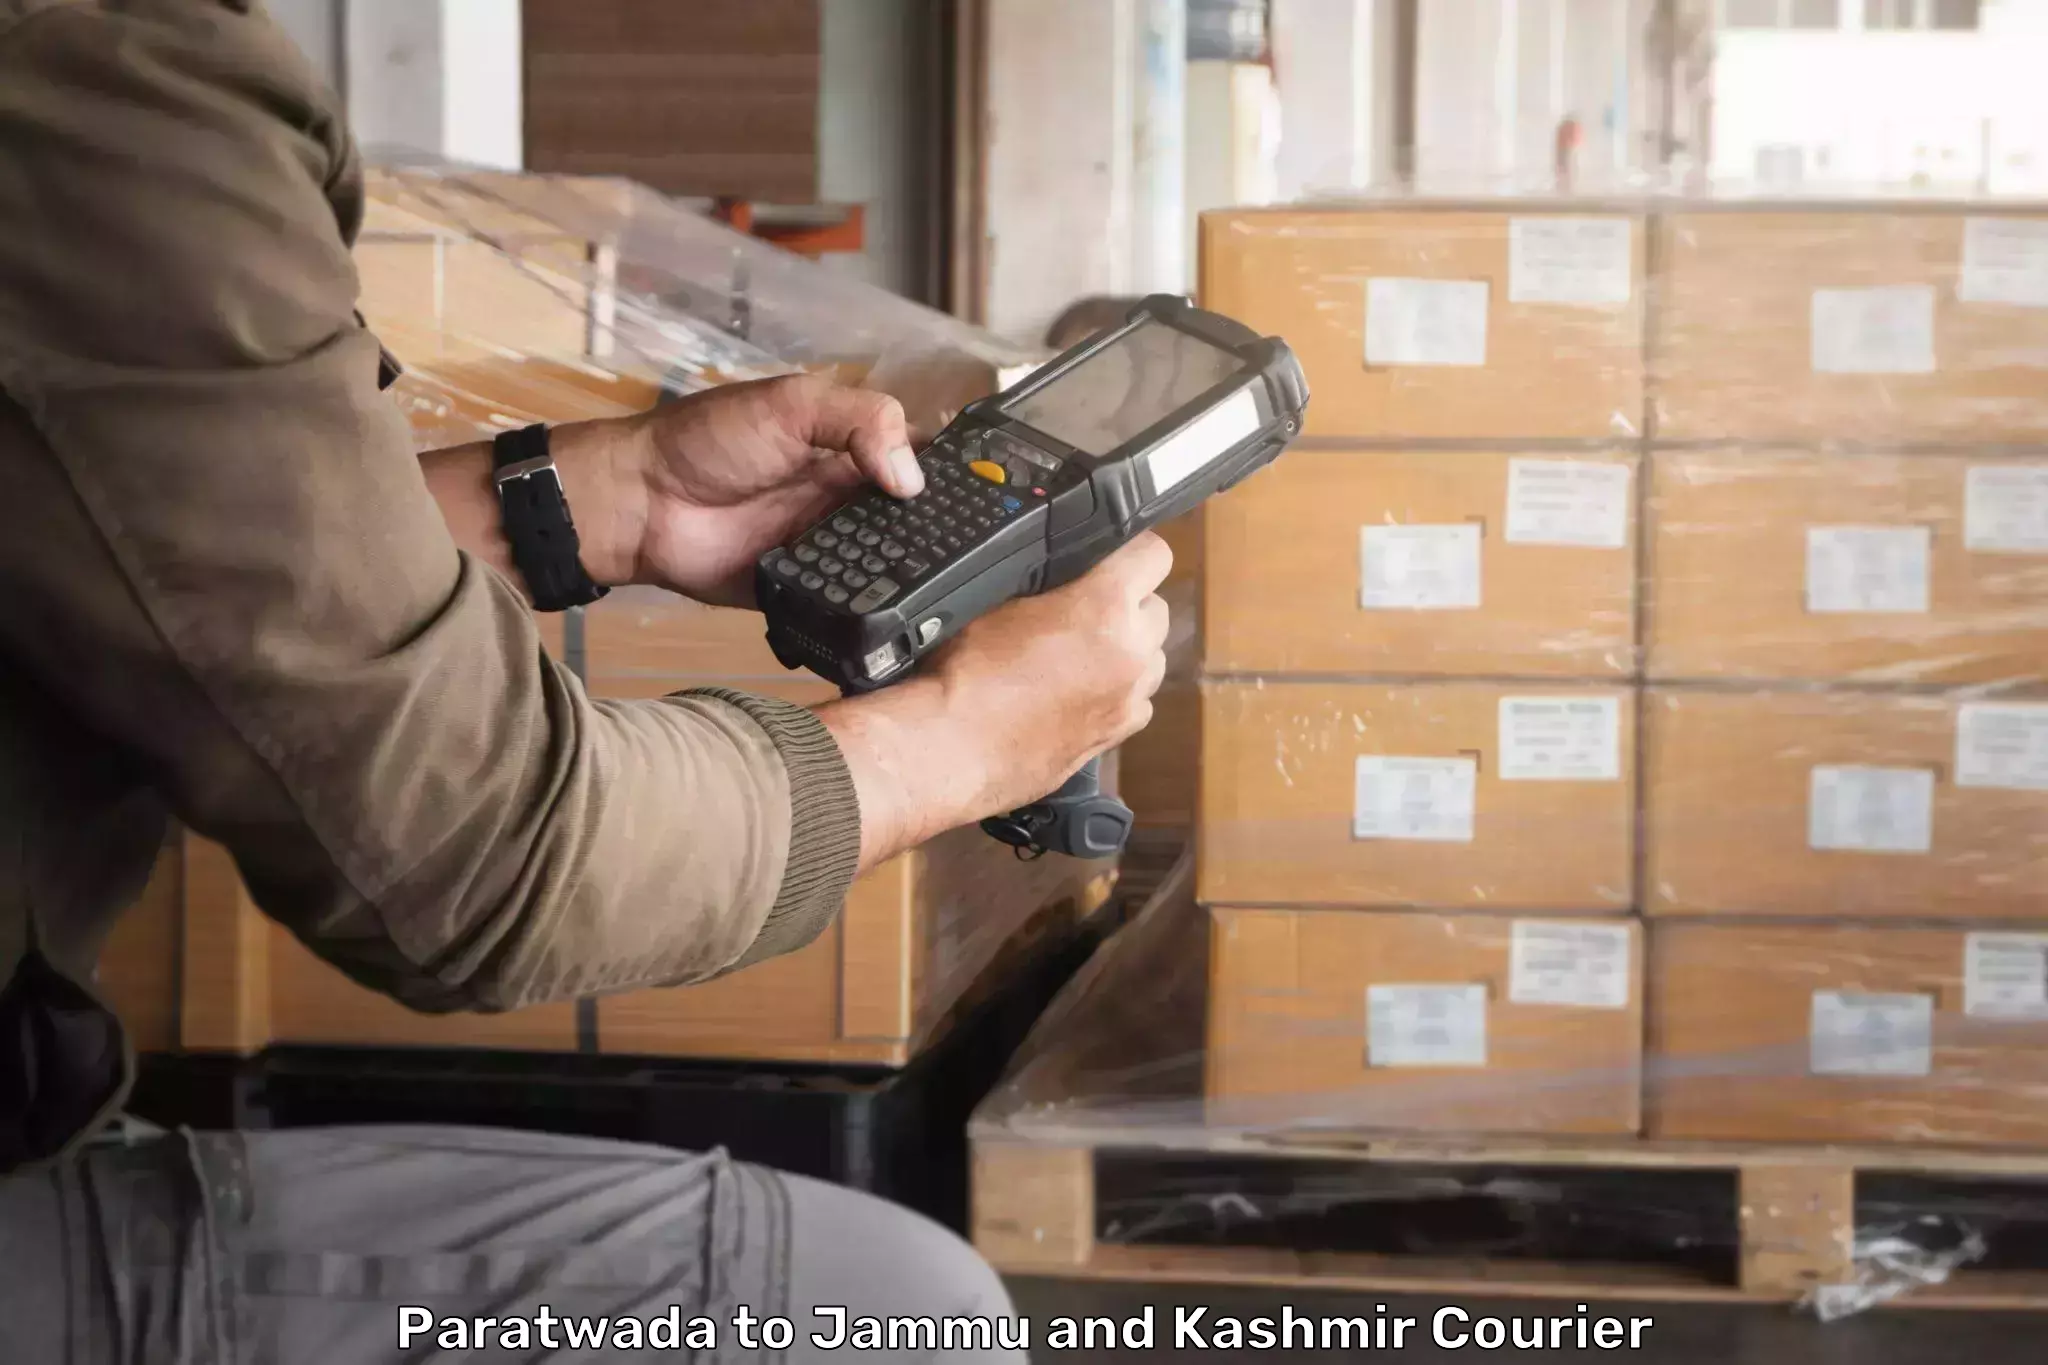 24-hour delivery options Paratwada to Rajouri